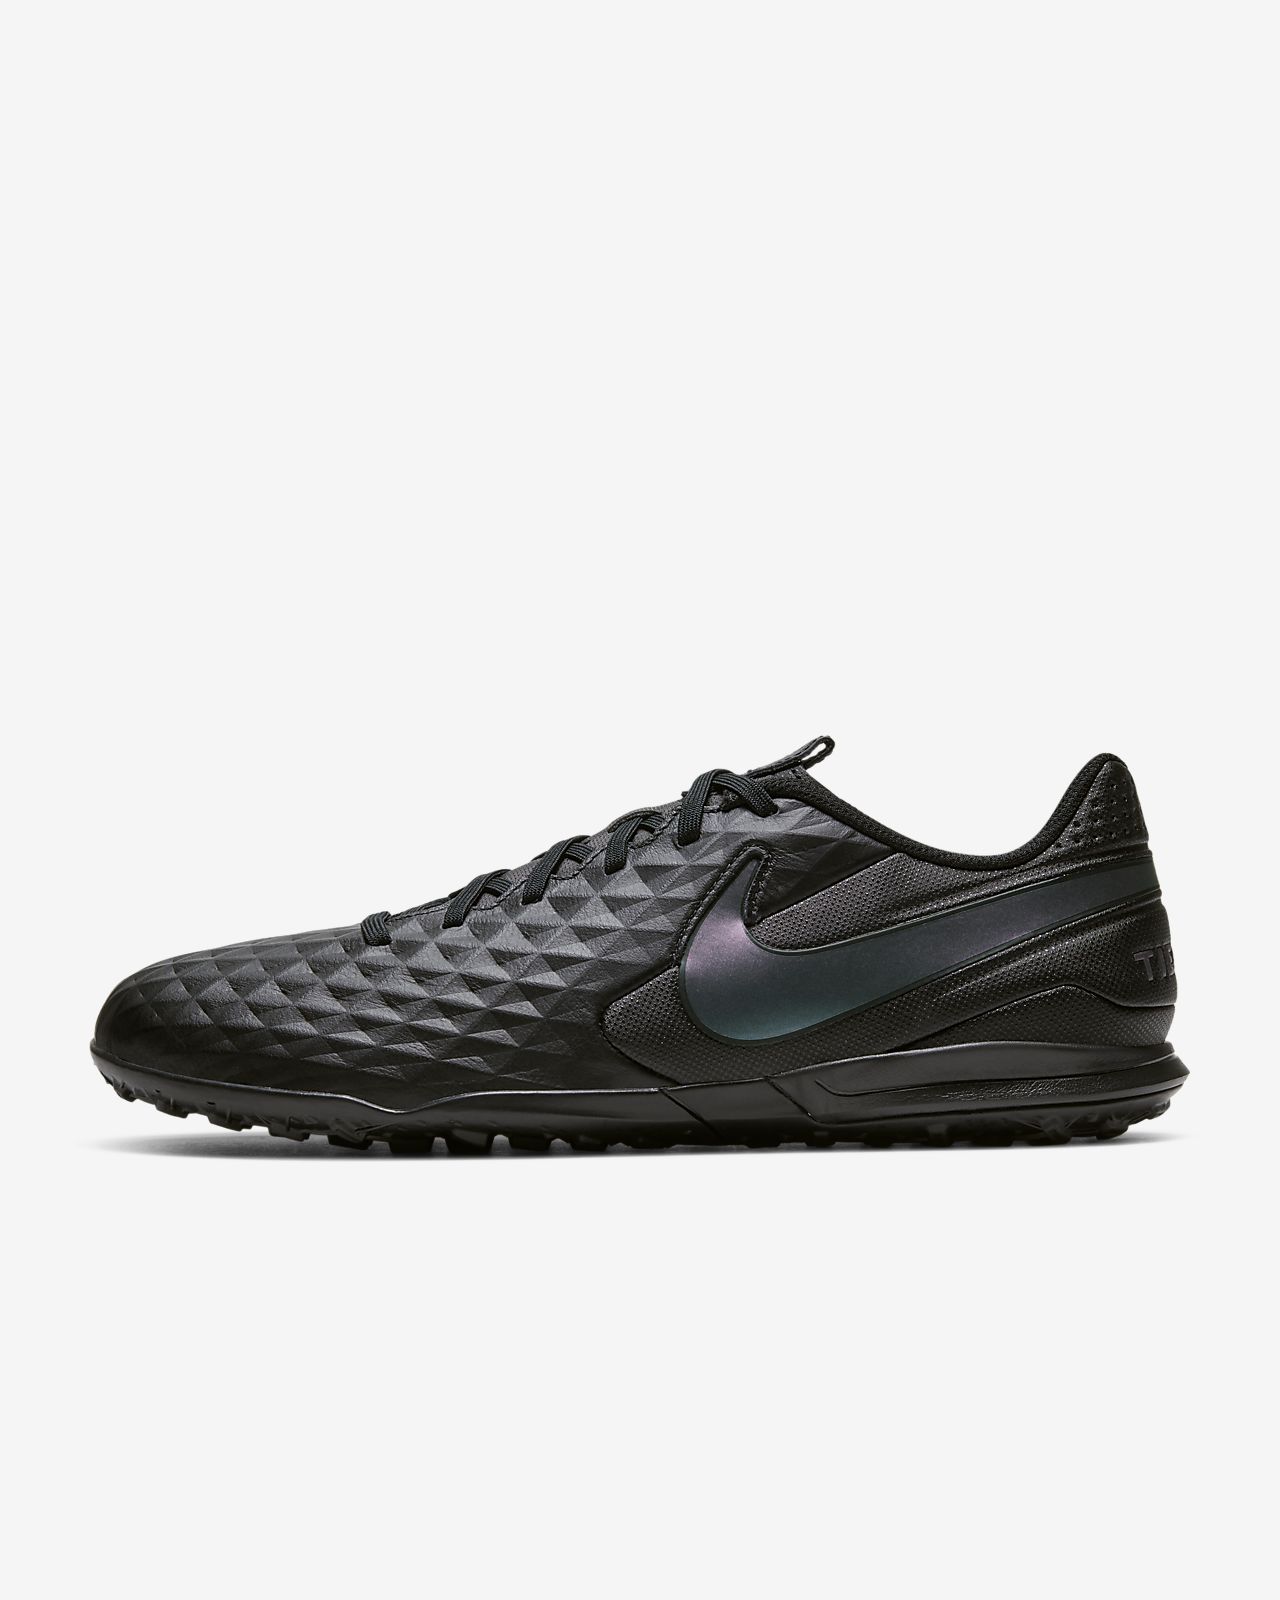 Nike Weather Legend 8 Pro Fg At6133 007 Price ‹ie.